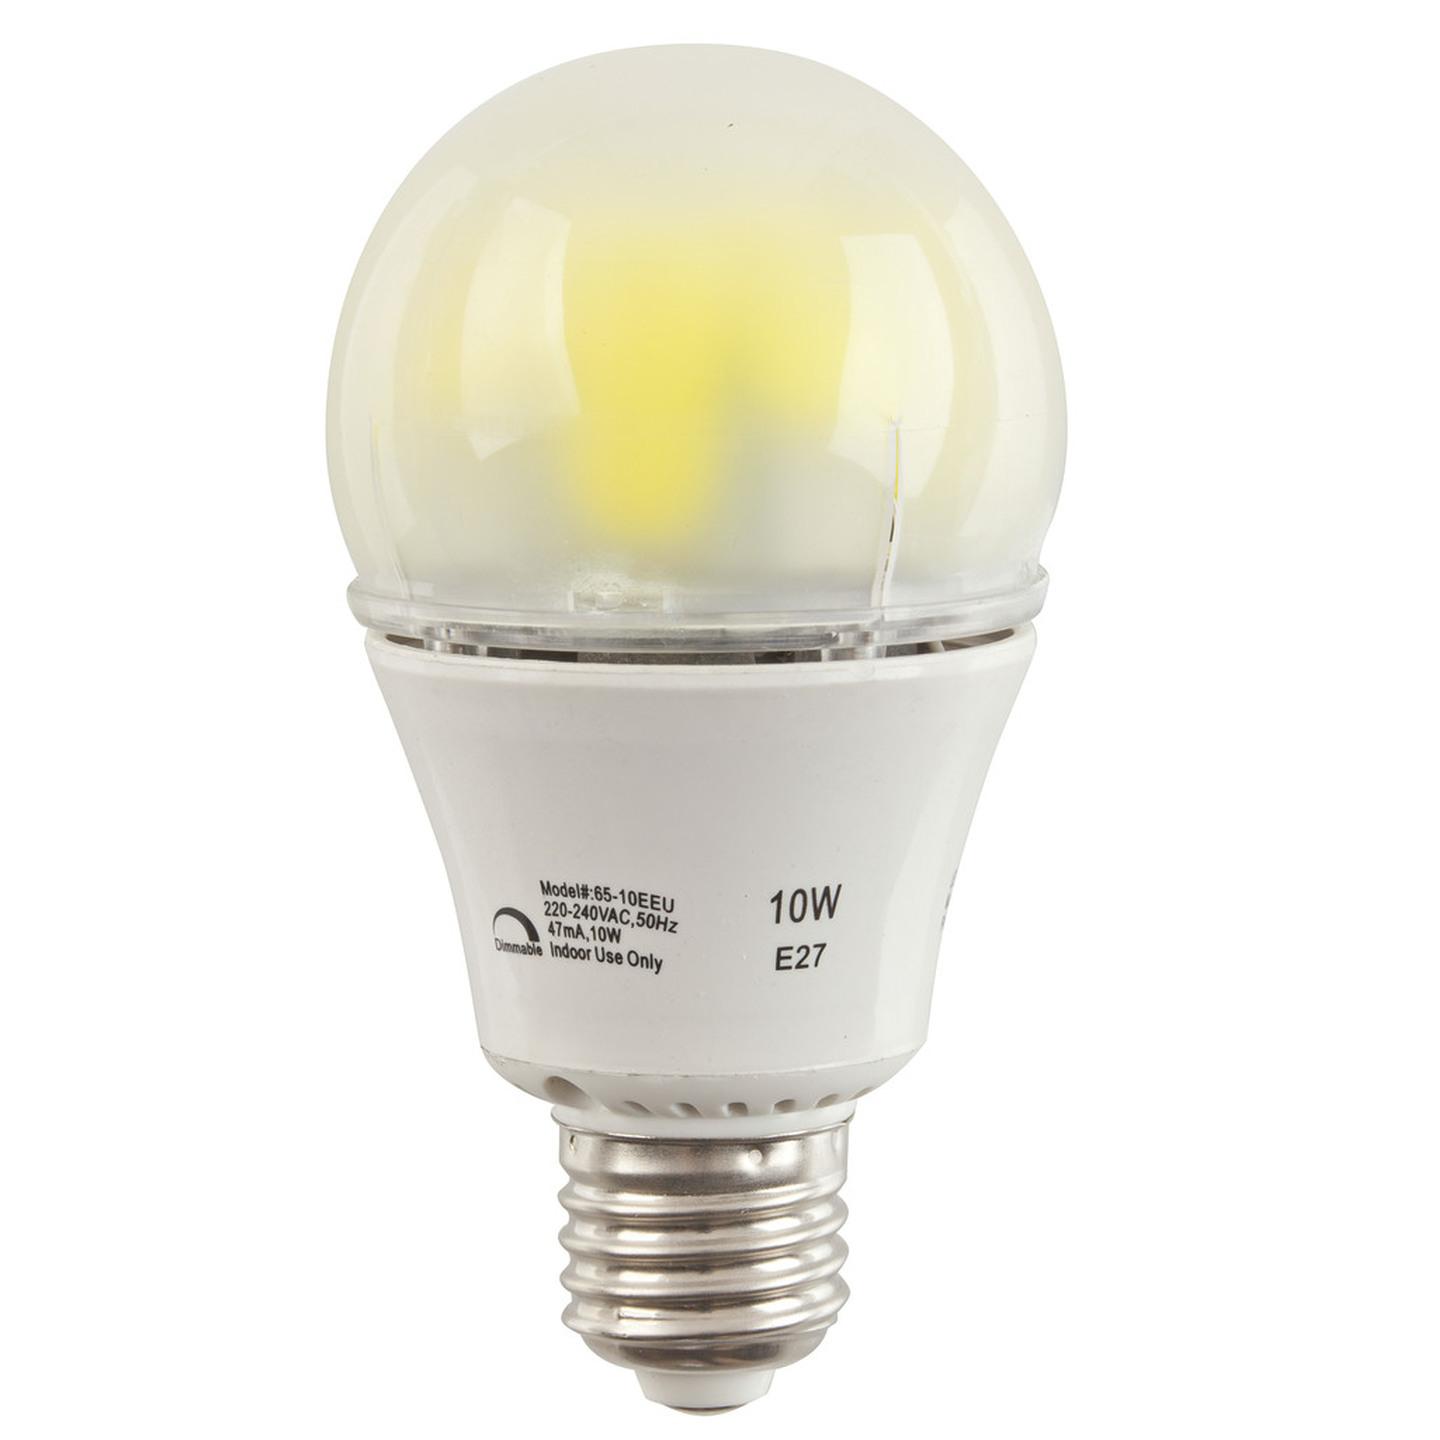 10W Dimmable Mains LED Light Globe Natural White Screw cap